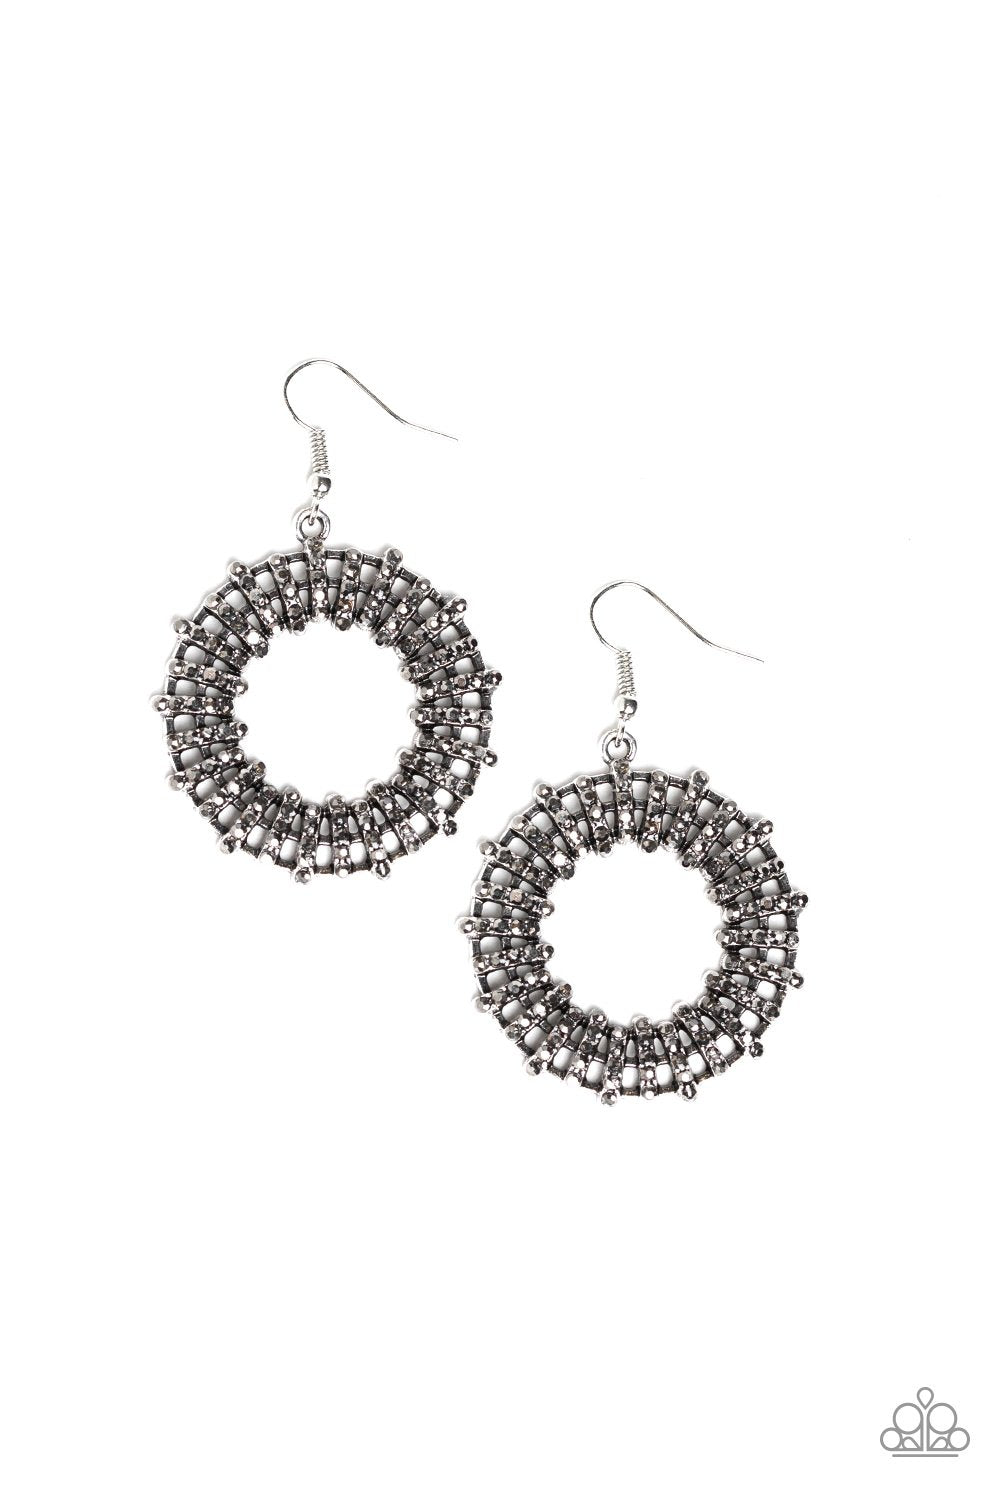 Girl of Your GLEAMS Silver and Hematite Earrings - Paparazzi Accessories-CarasShop.com - $5 Jewelry by Cara Jewels